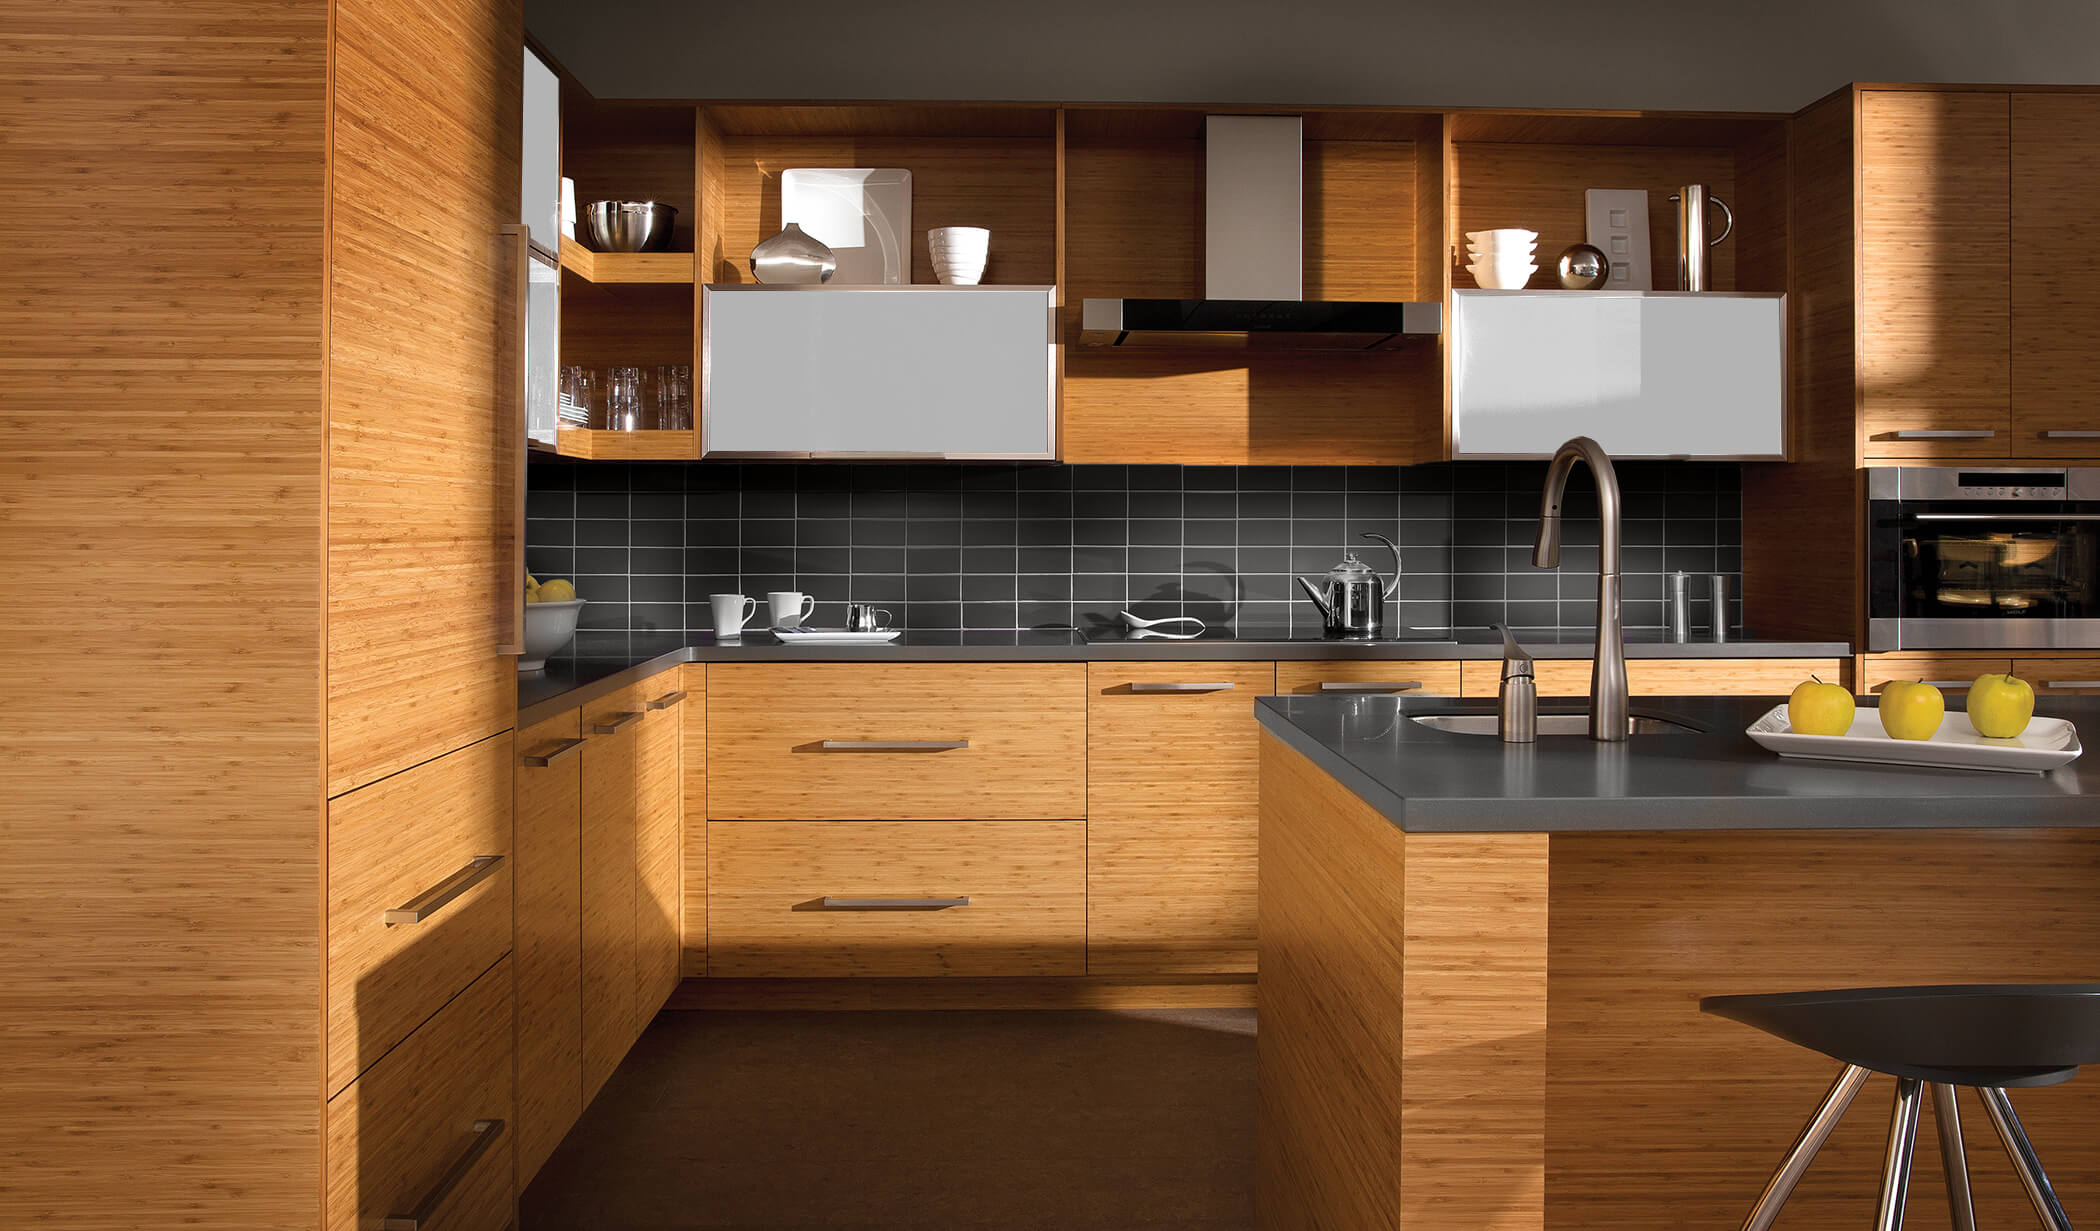 A modern kitchen with bamboo cabinets with a horizontal grain pattern.